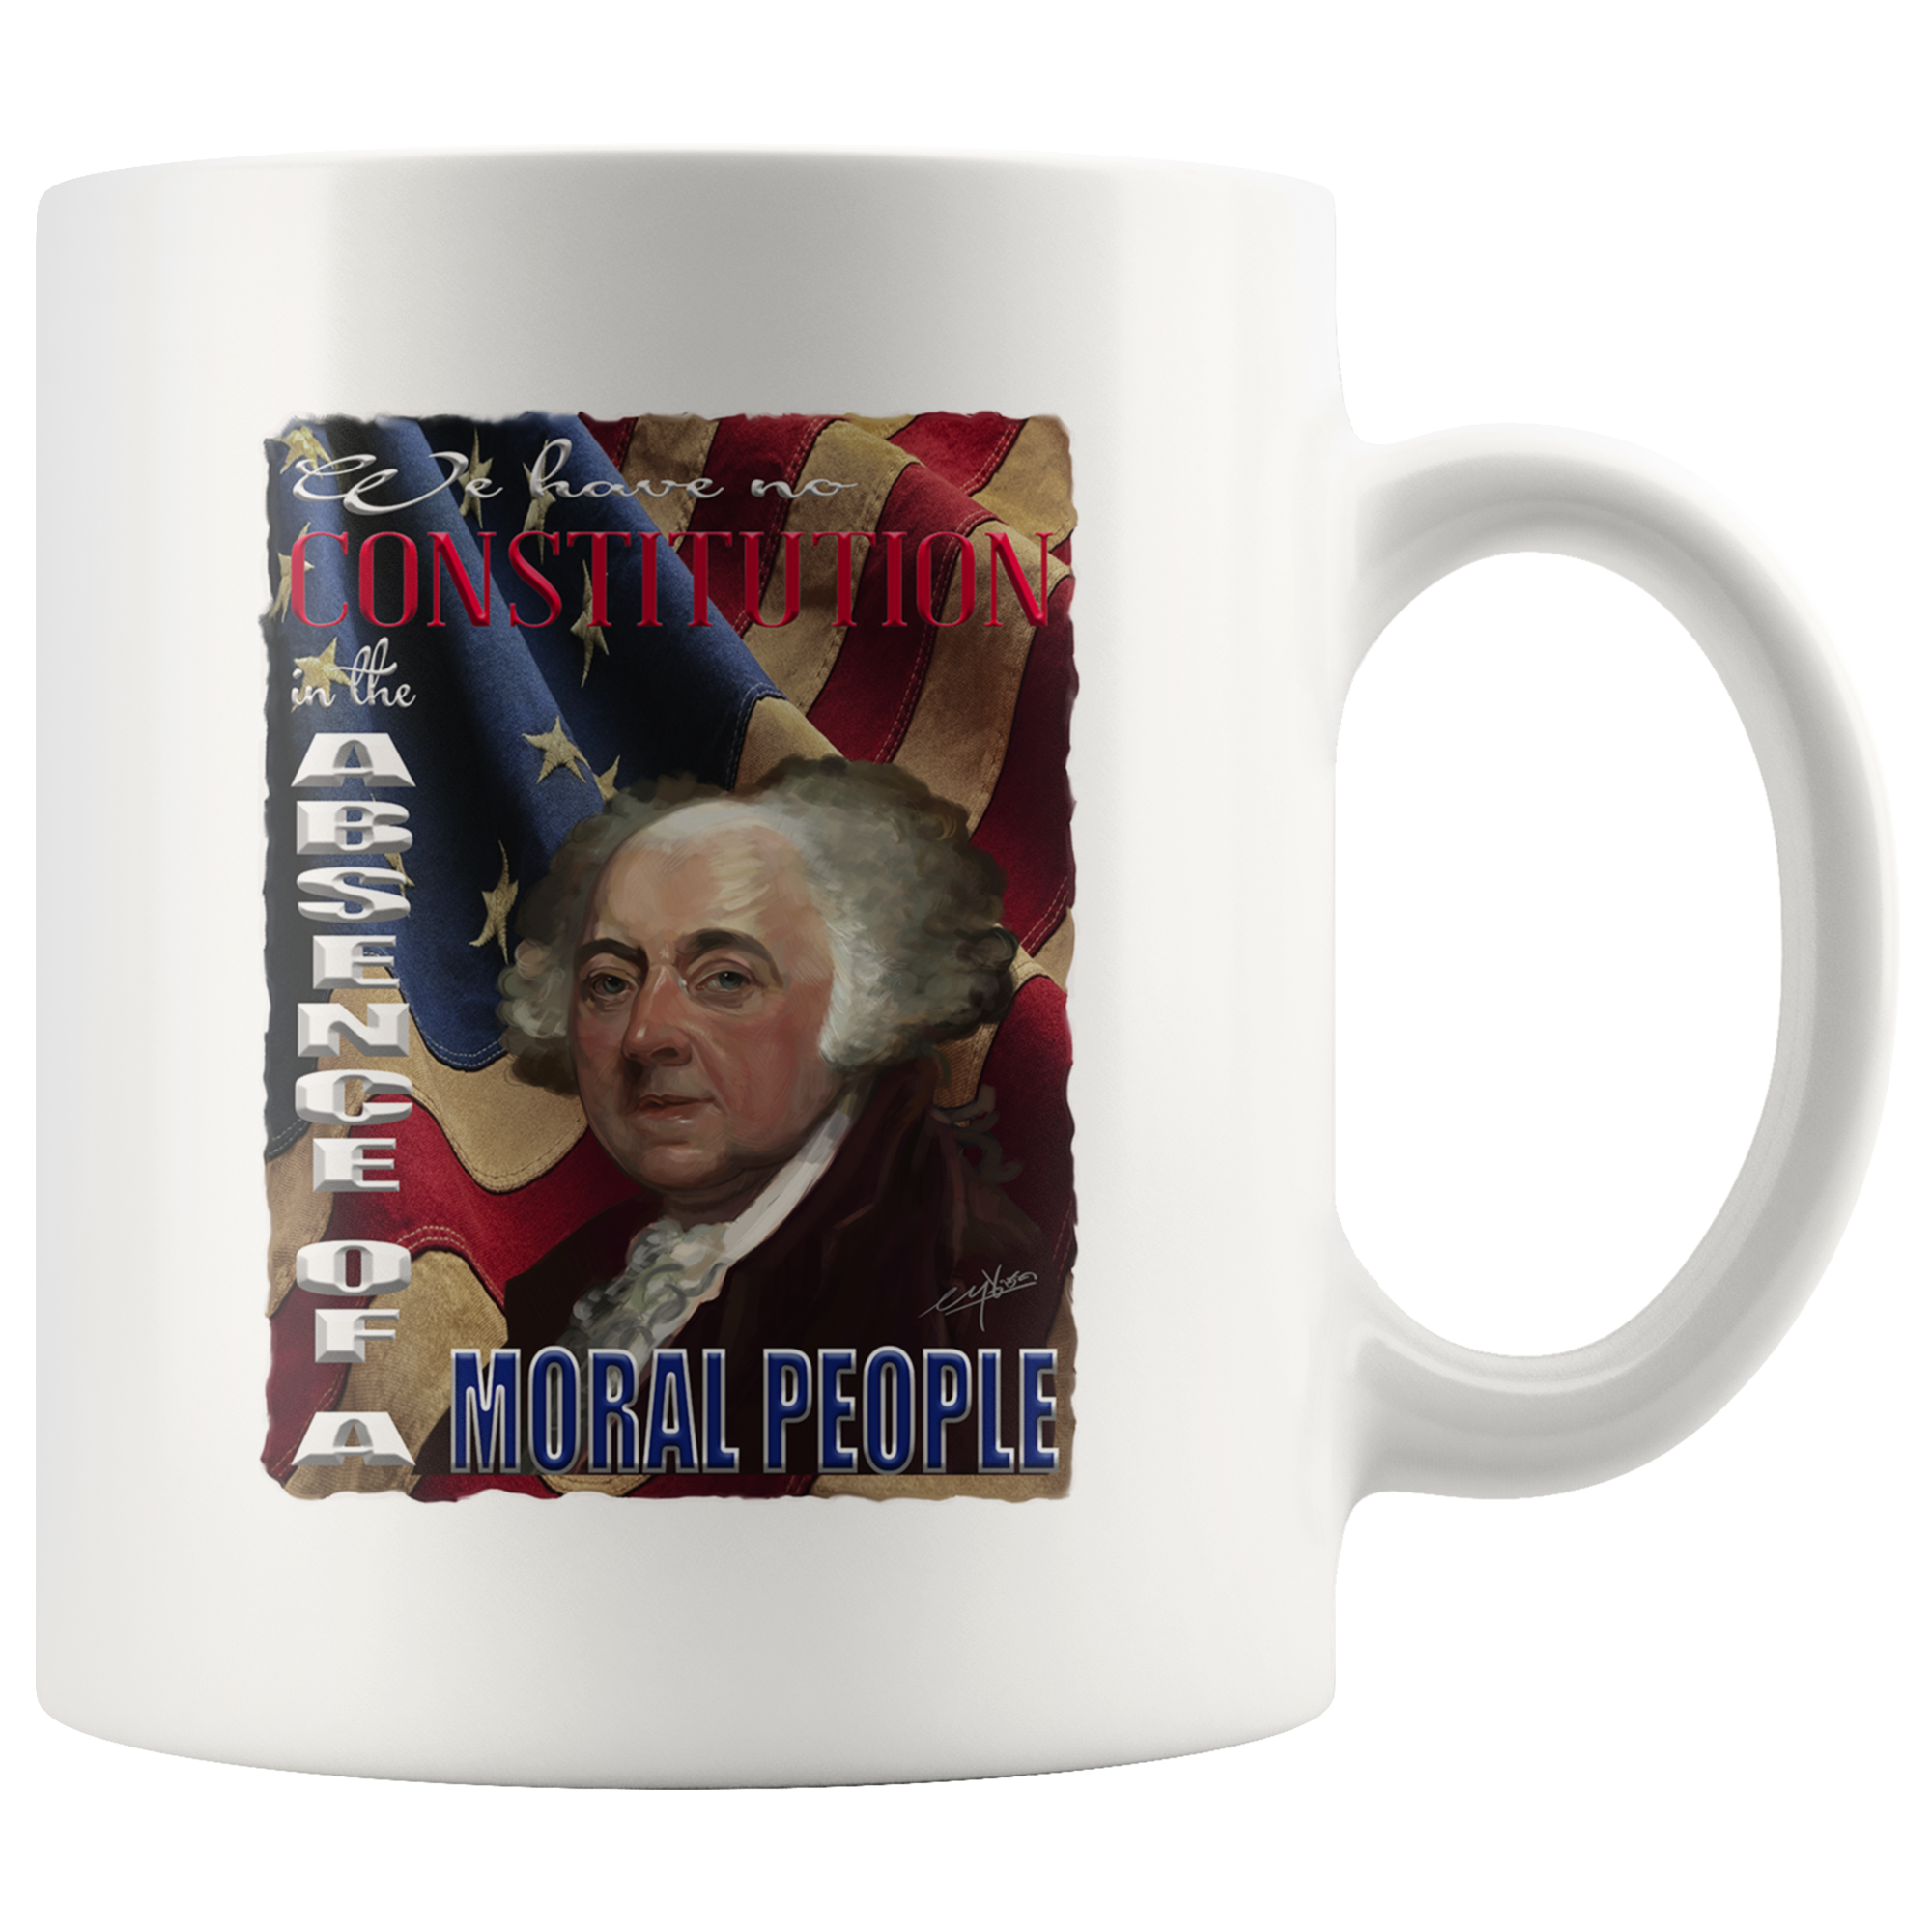 JOHN ADAMS -"WE HAVE NO CONSTITUTION IN THE ABSENCE OF A MORAL PEOPLE"